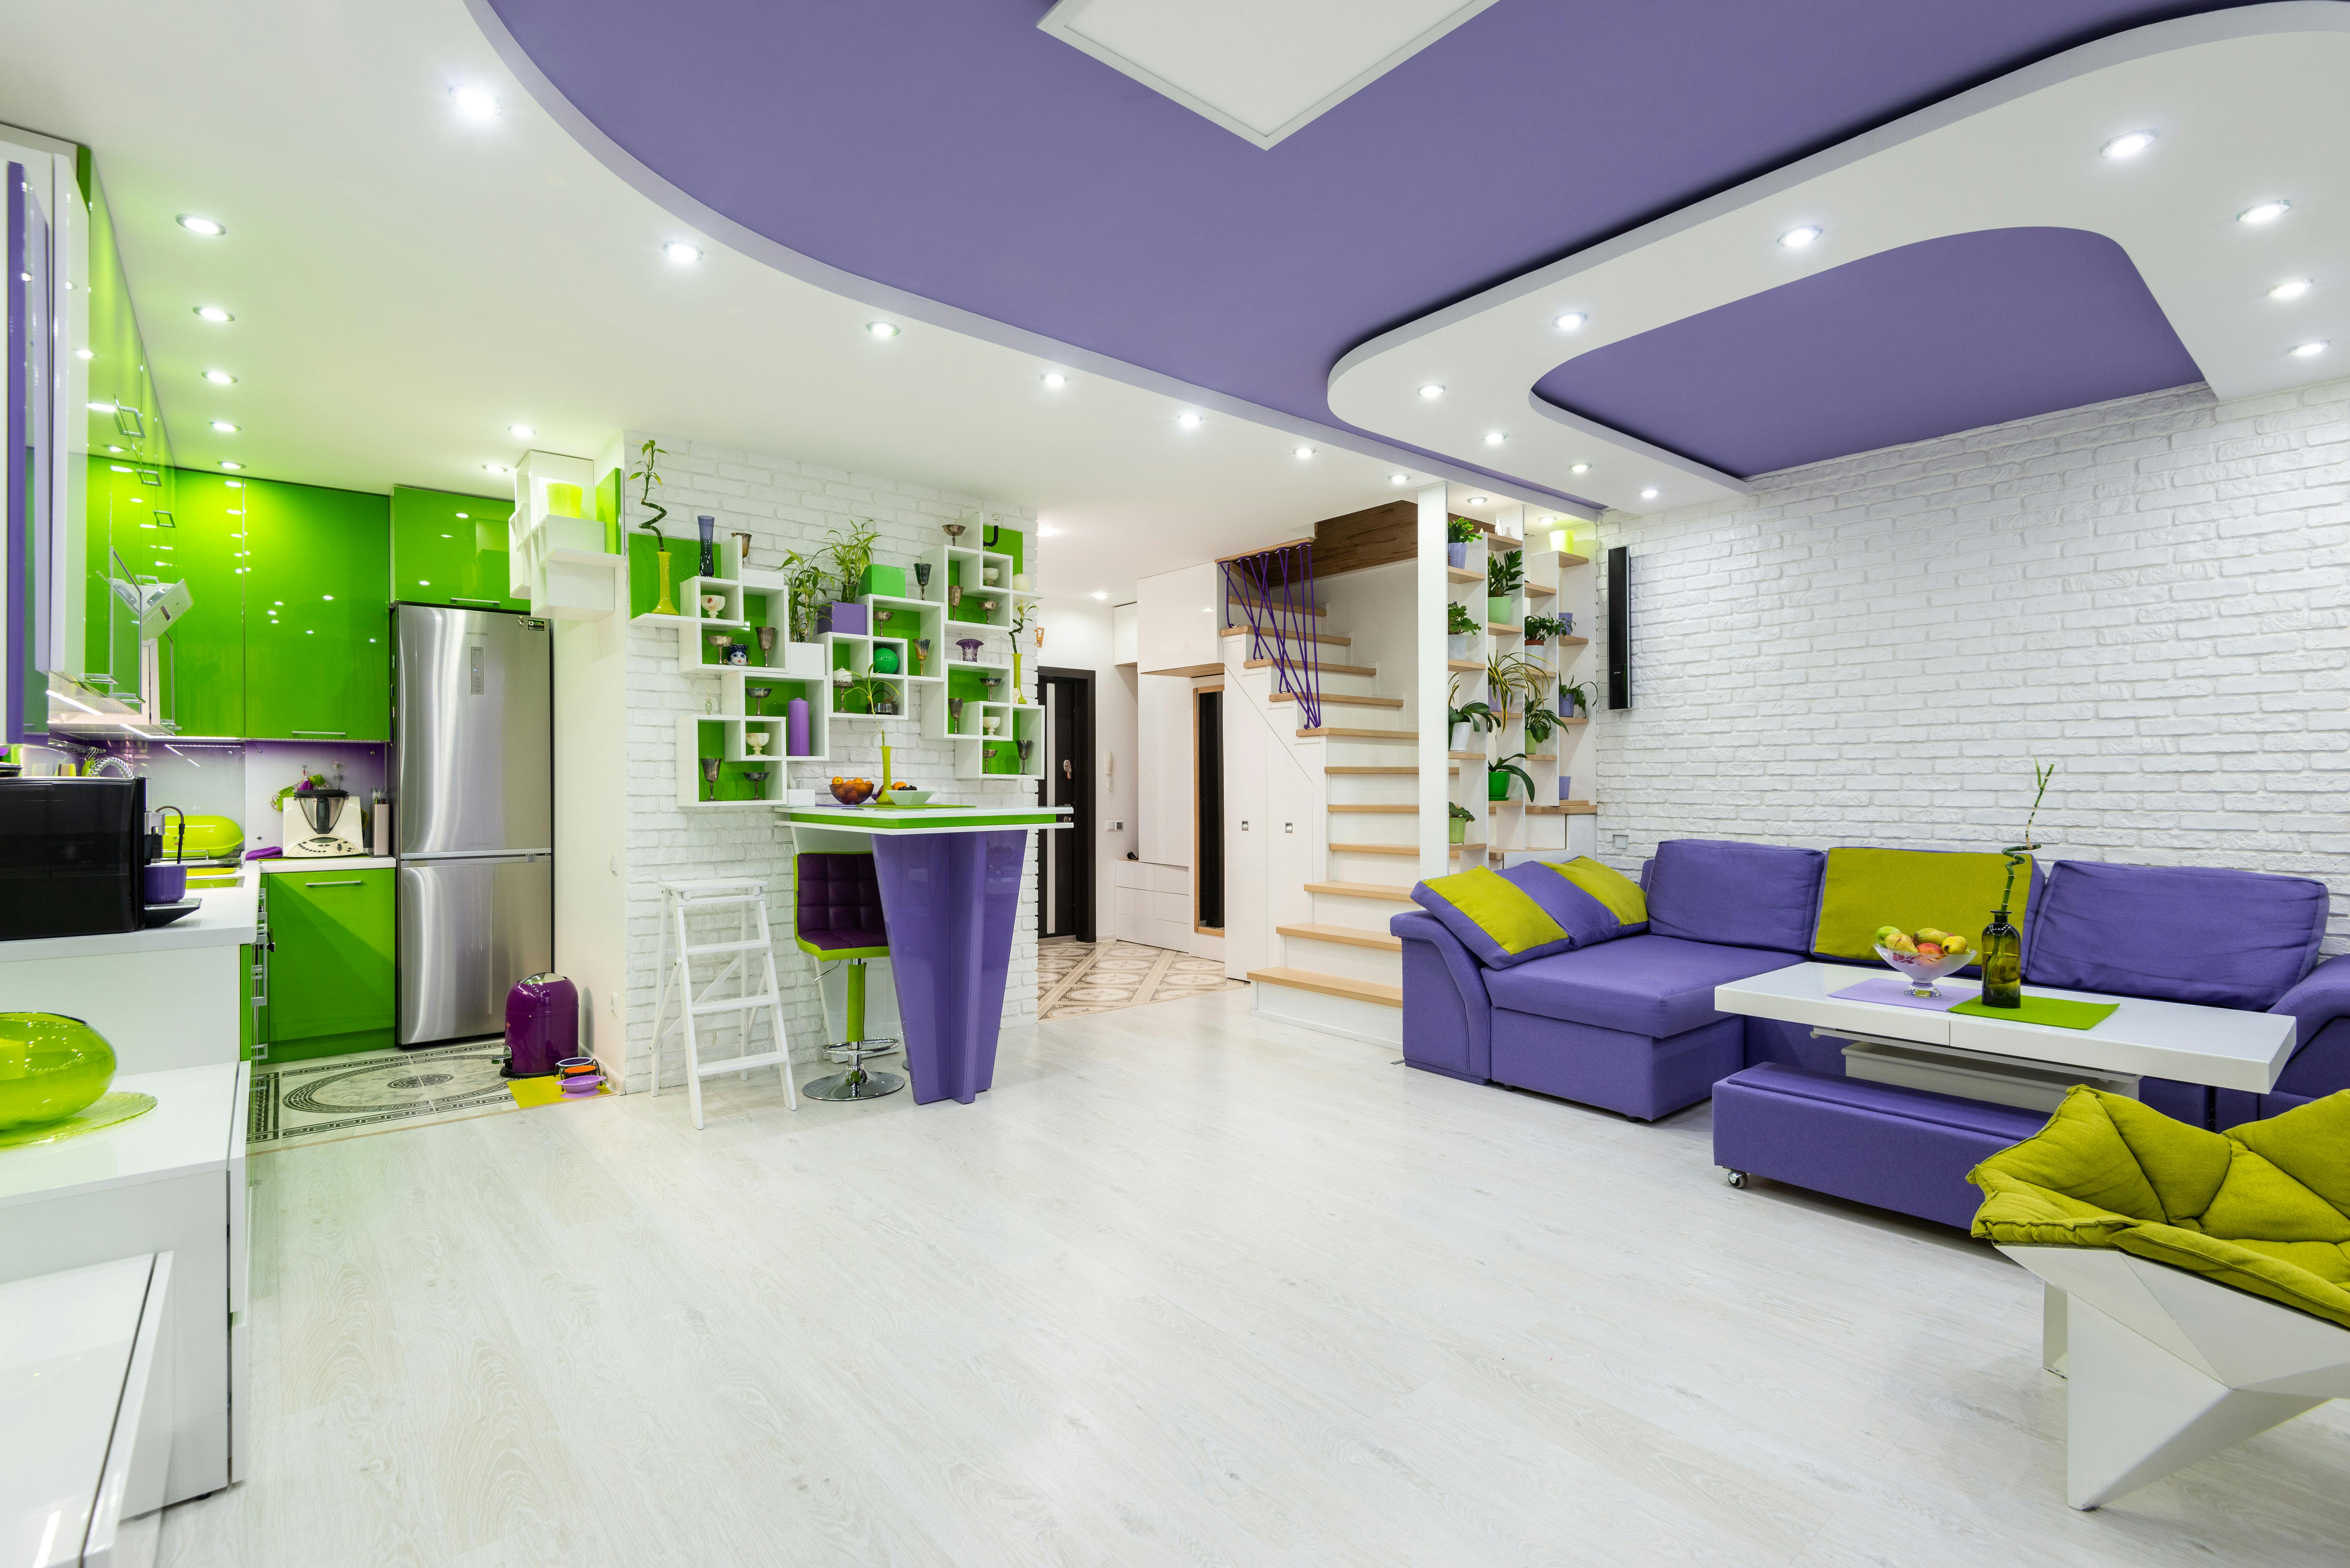 spacious living room with trendy design and kitchen zone with bright green furniture